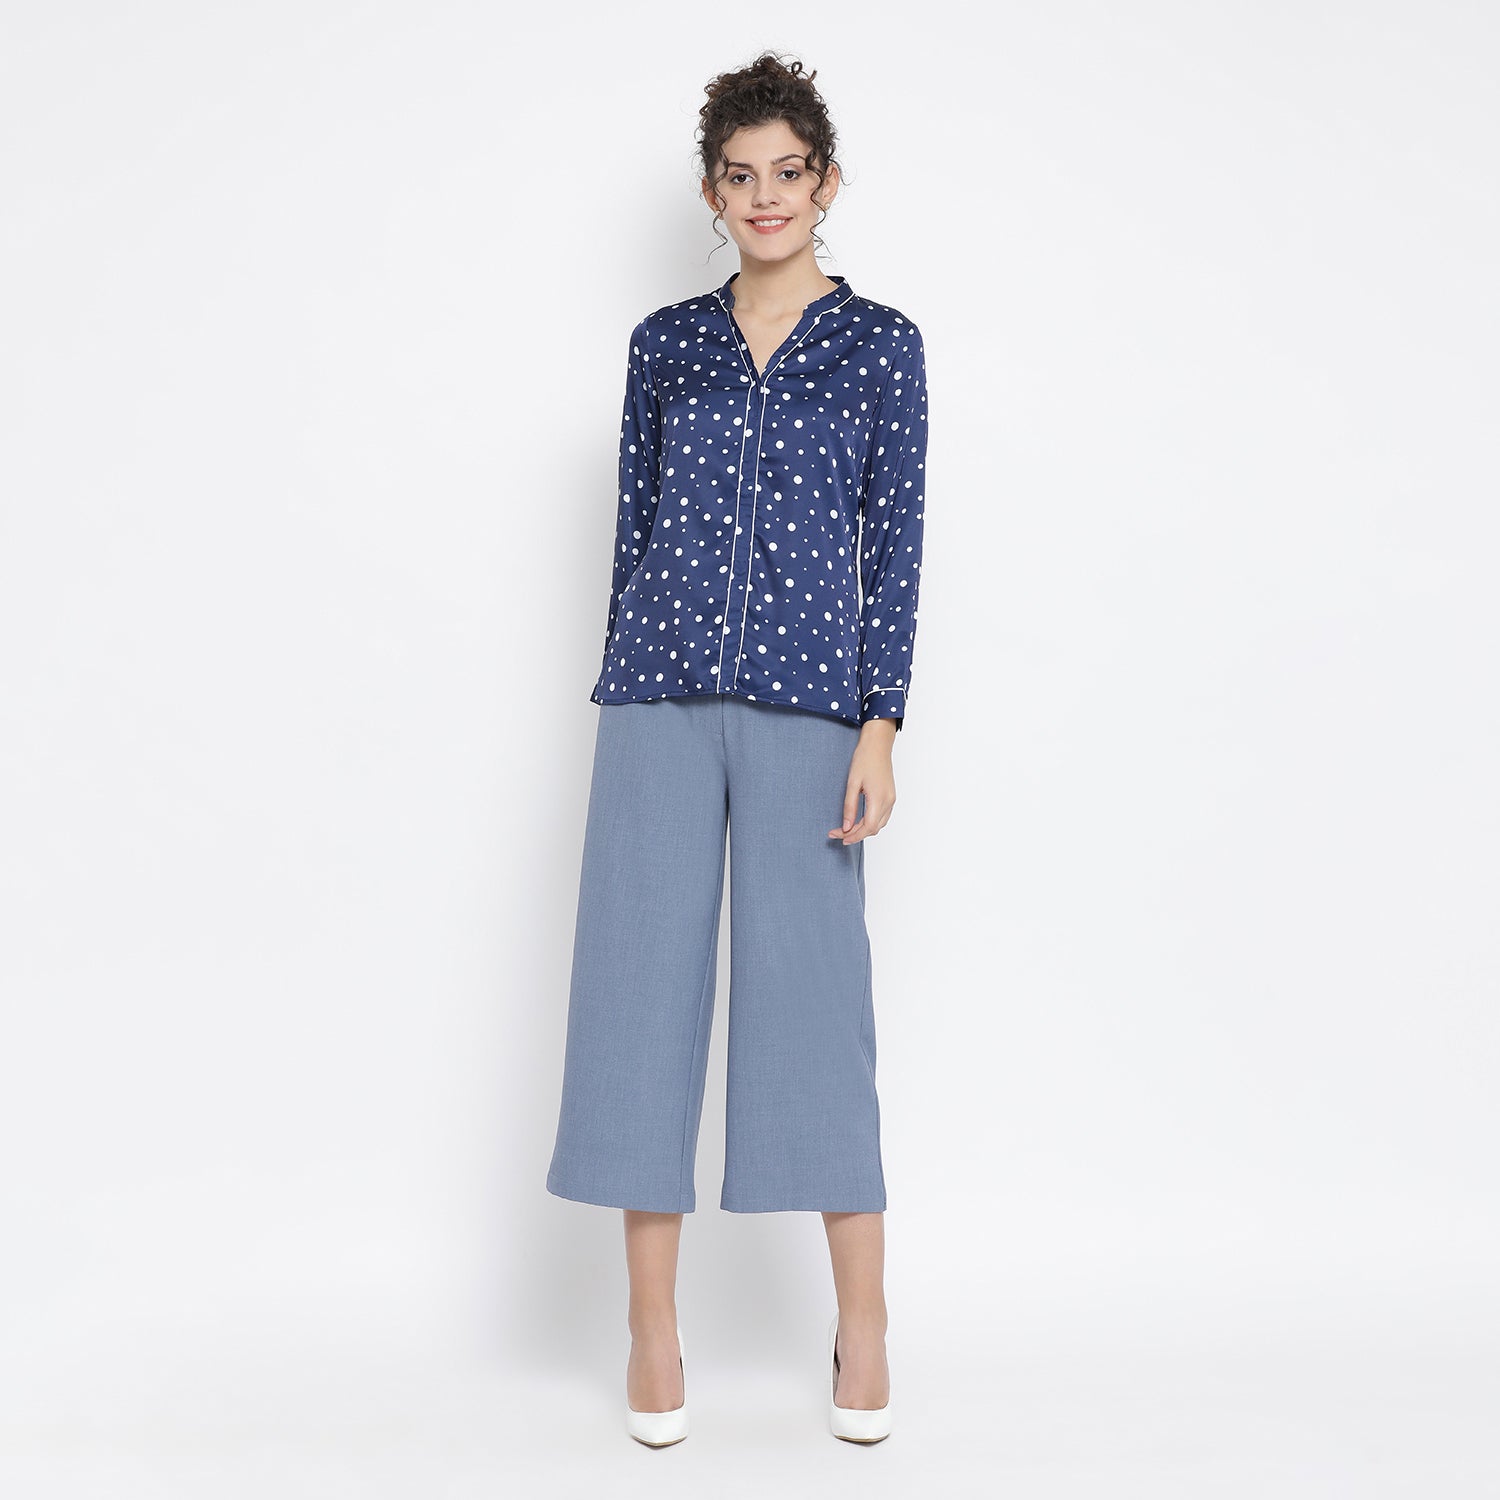 Blue White Silk Polka Top With Contrast Piping